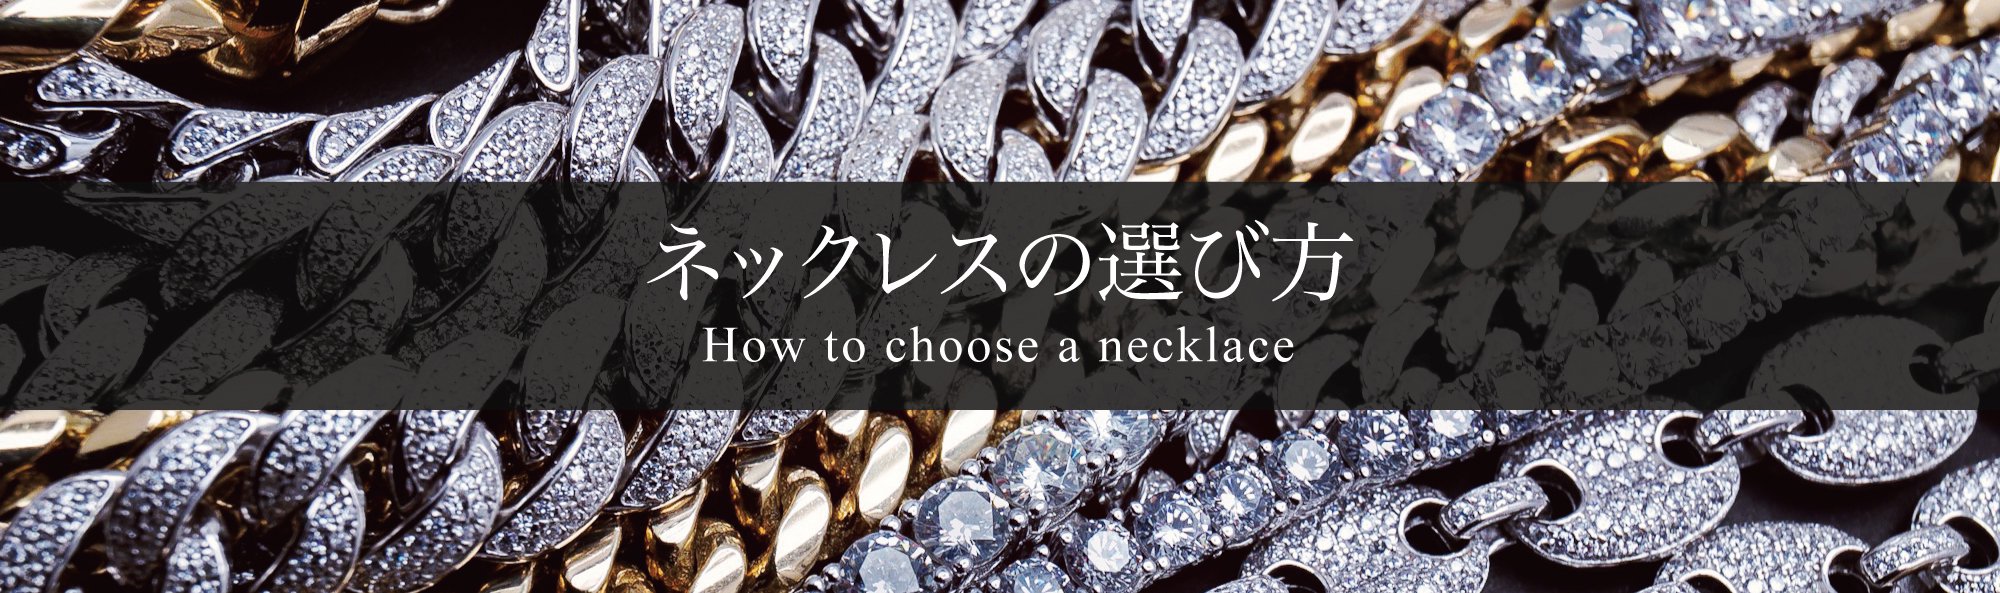 NECKLACE_DESIGN-ネックレスの選び方 - AVALANCHE OFFICIAL STORE